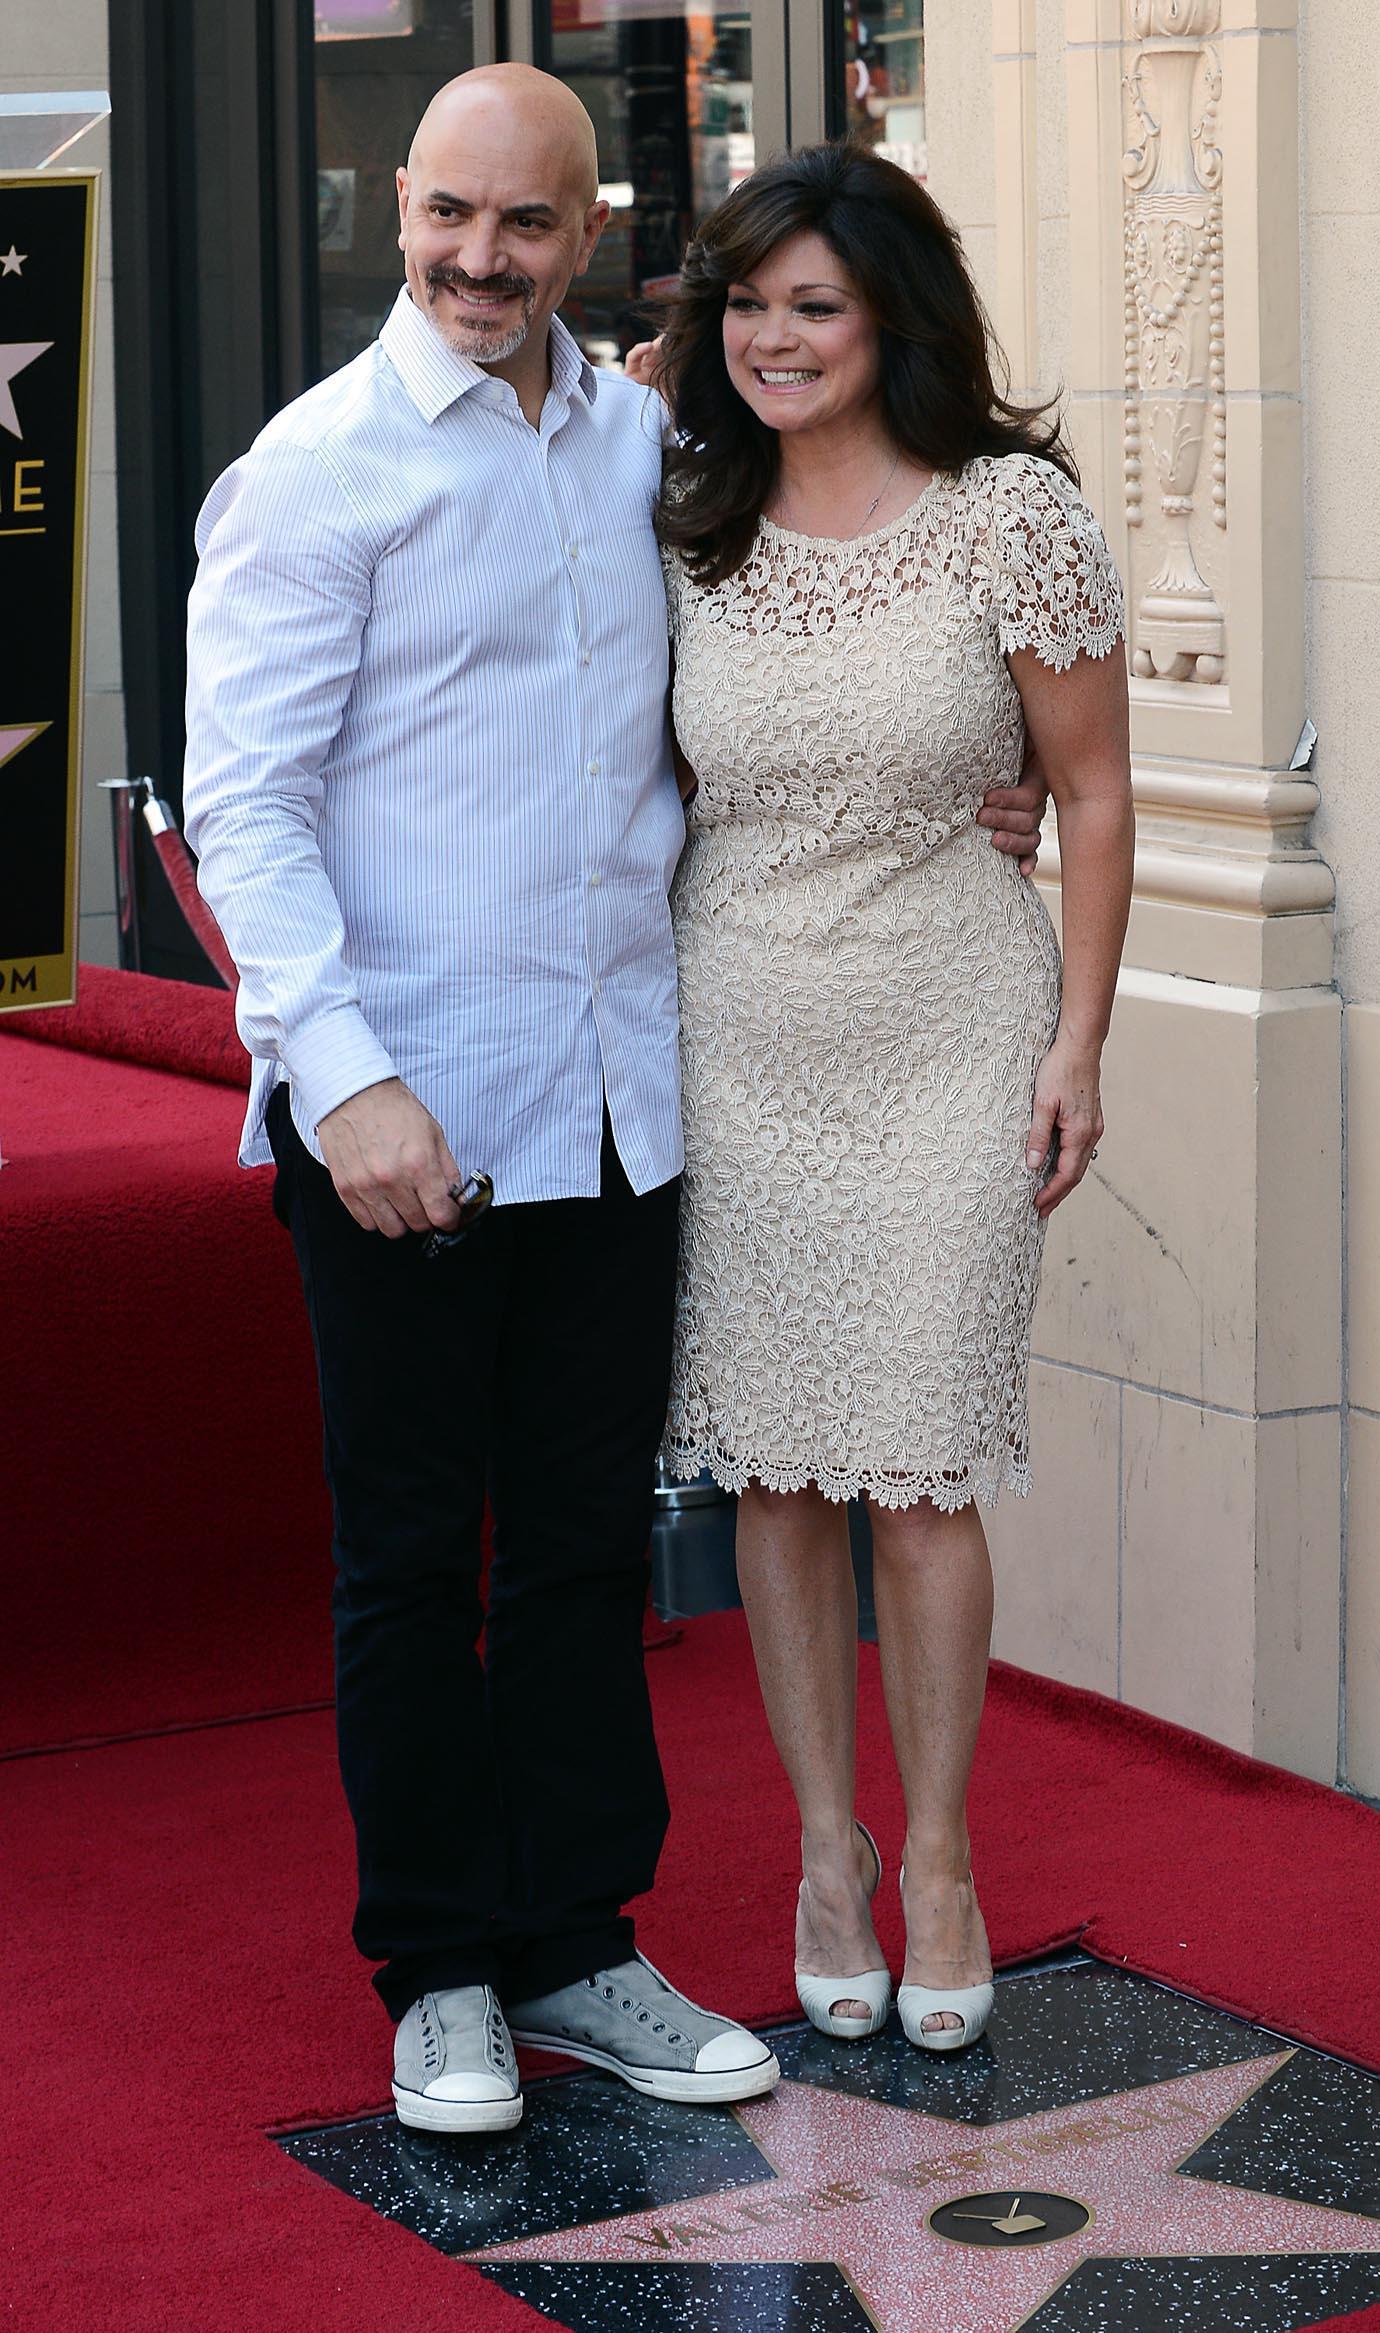 ‘Food Network’ Star Valerie Bertinelli Files For Legal Separation From Husband